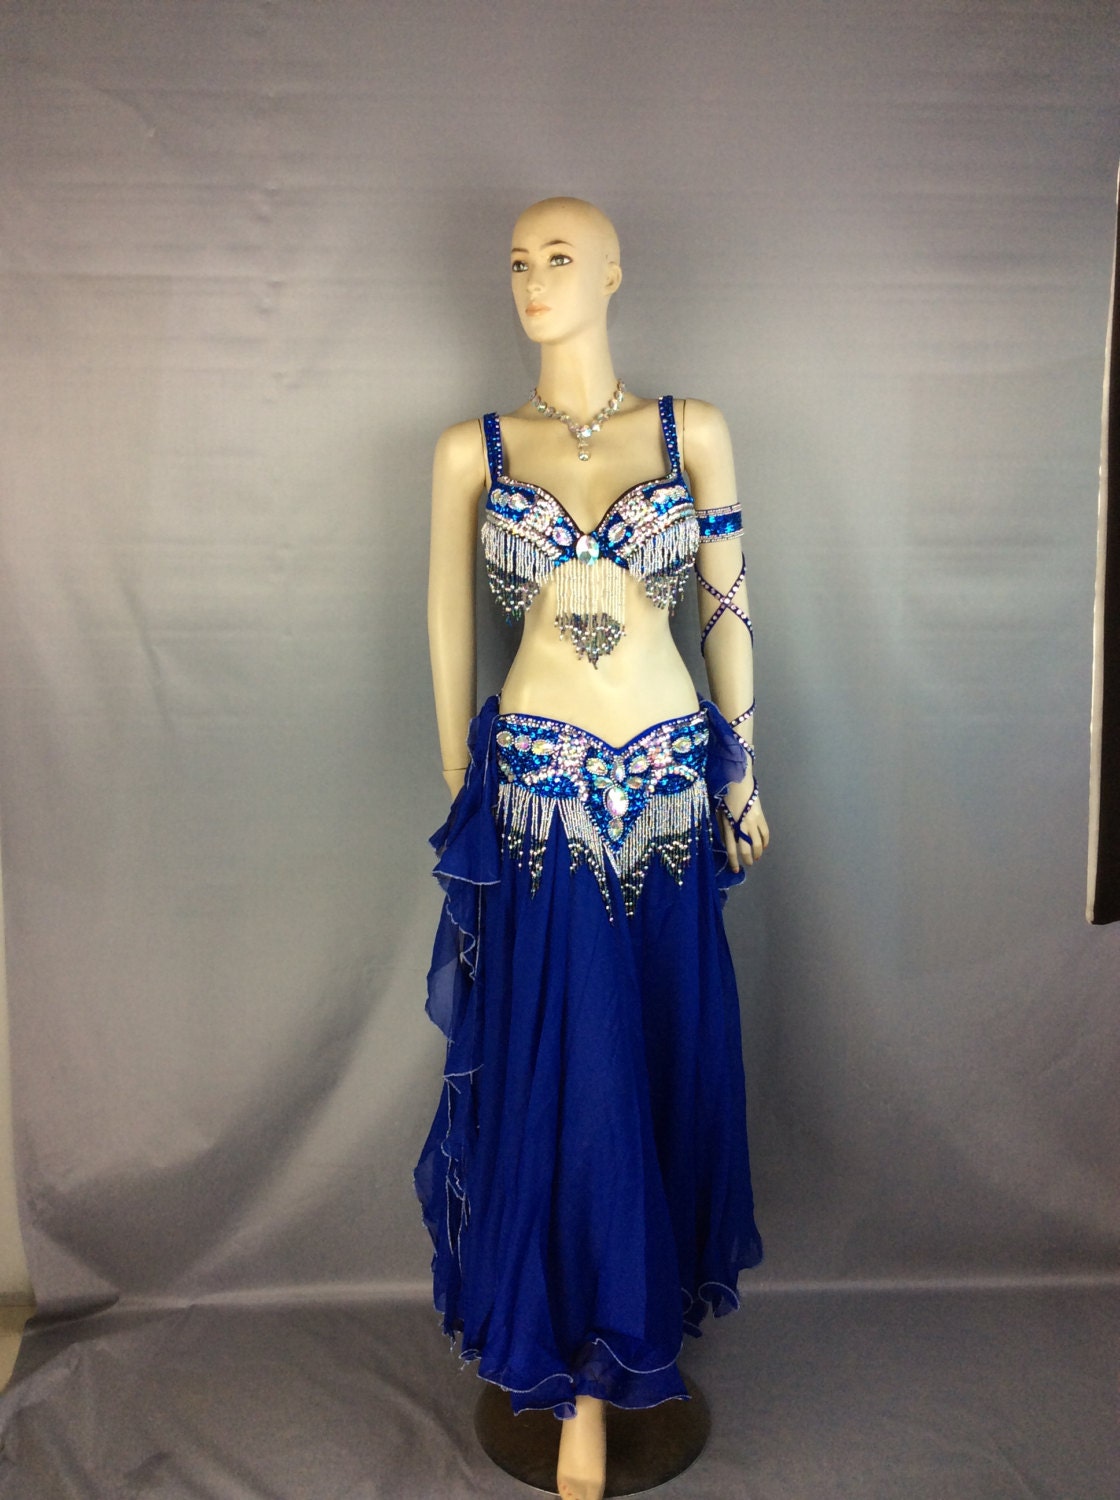 Handmade Vintage Style Mermaid Bellydance Costume Bra and Belt Set With  Crystal, Pearls and Trim 